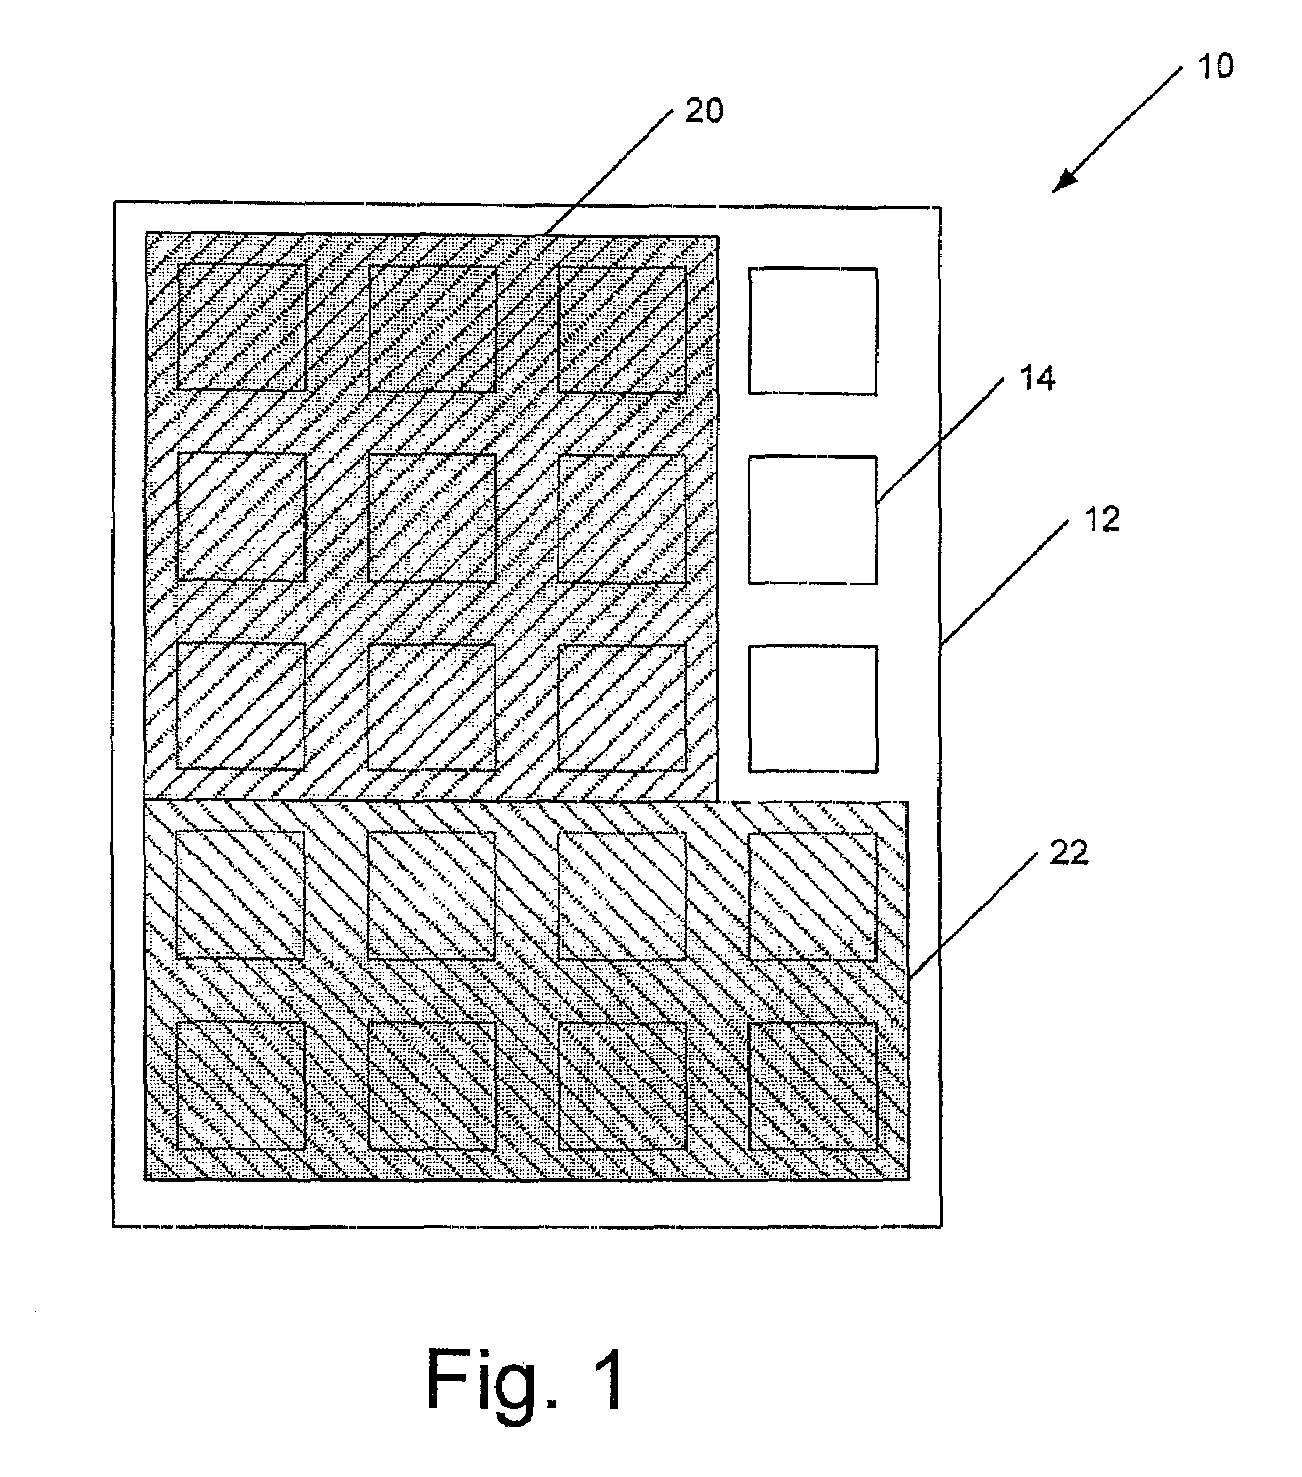 Illumination device having one or more lumiphors, and methods of fabricating same